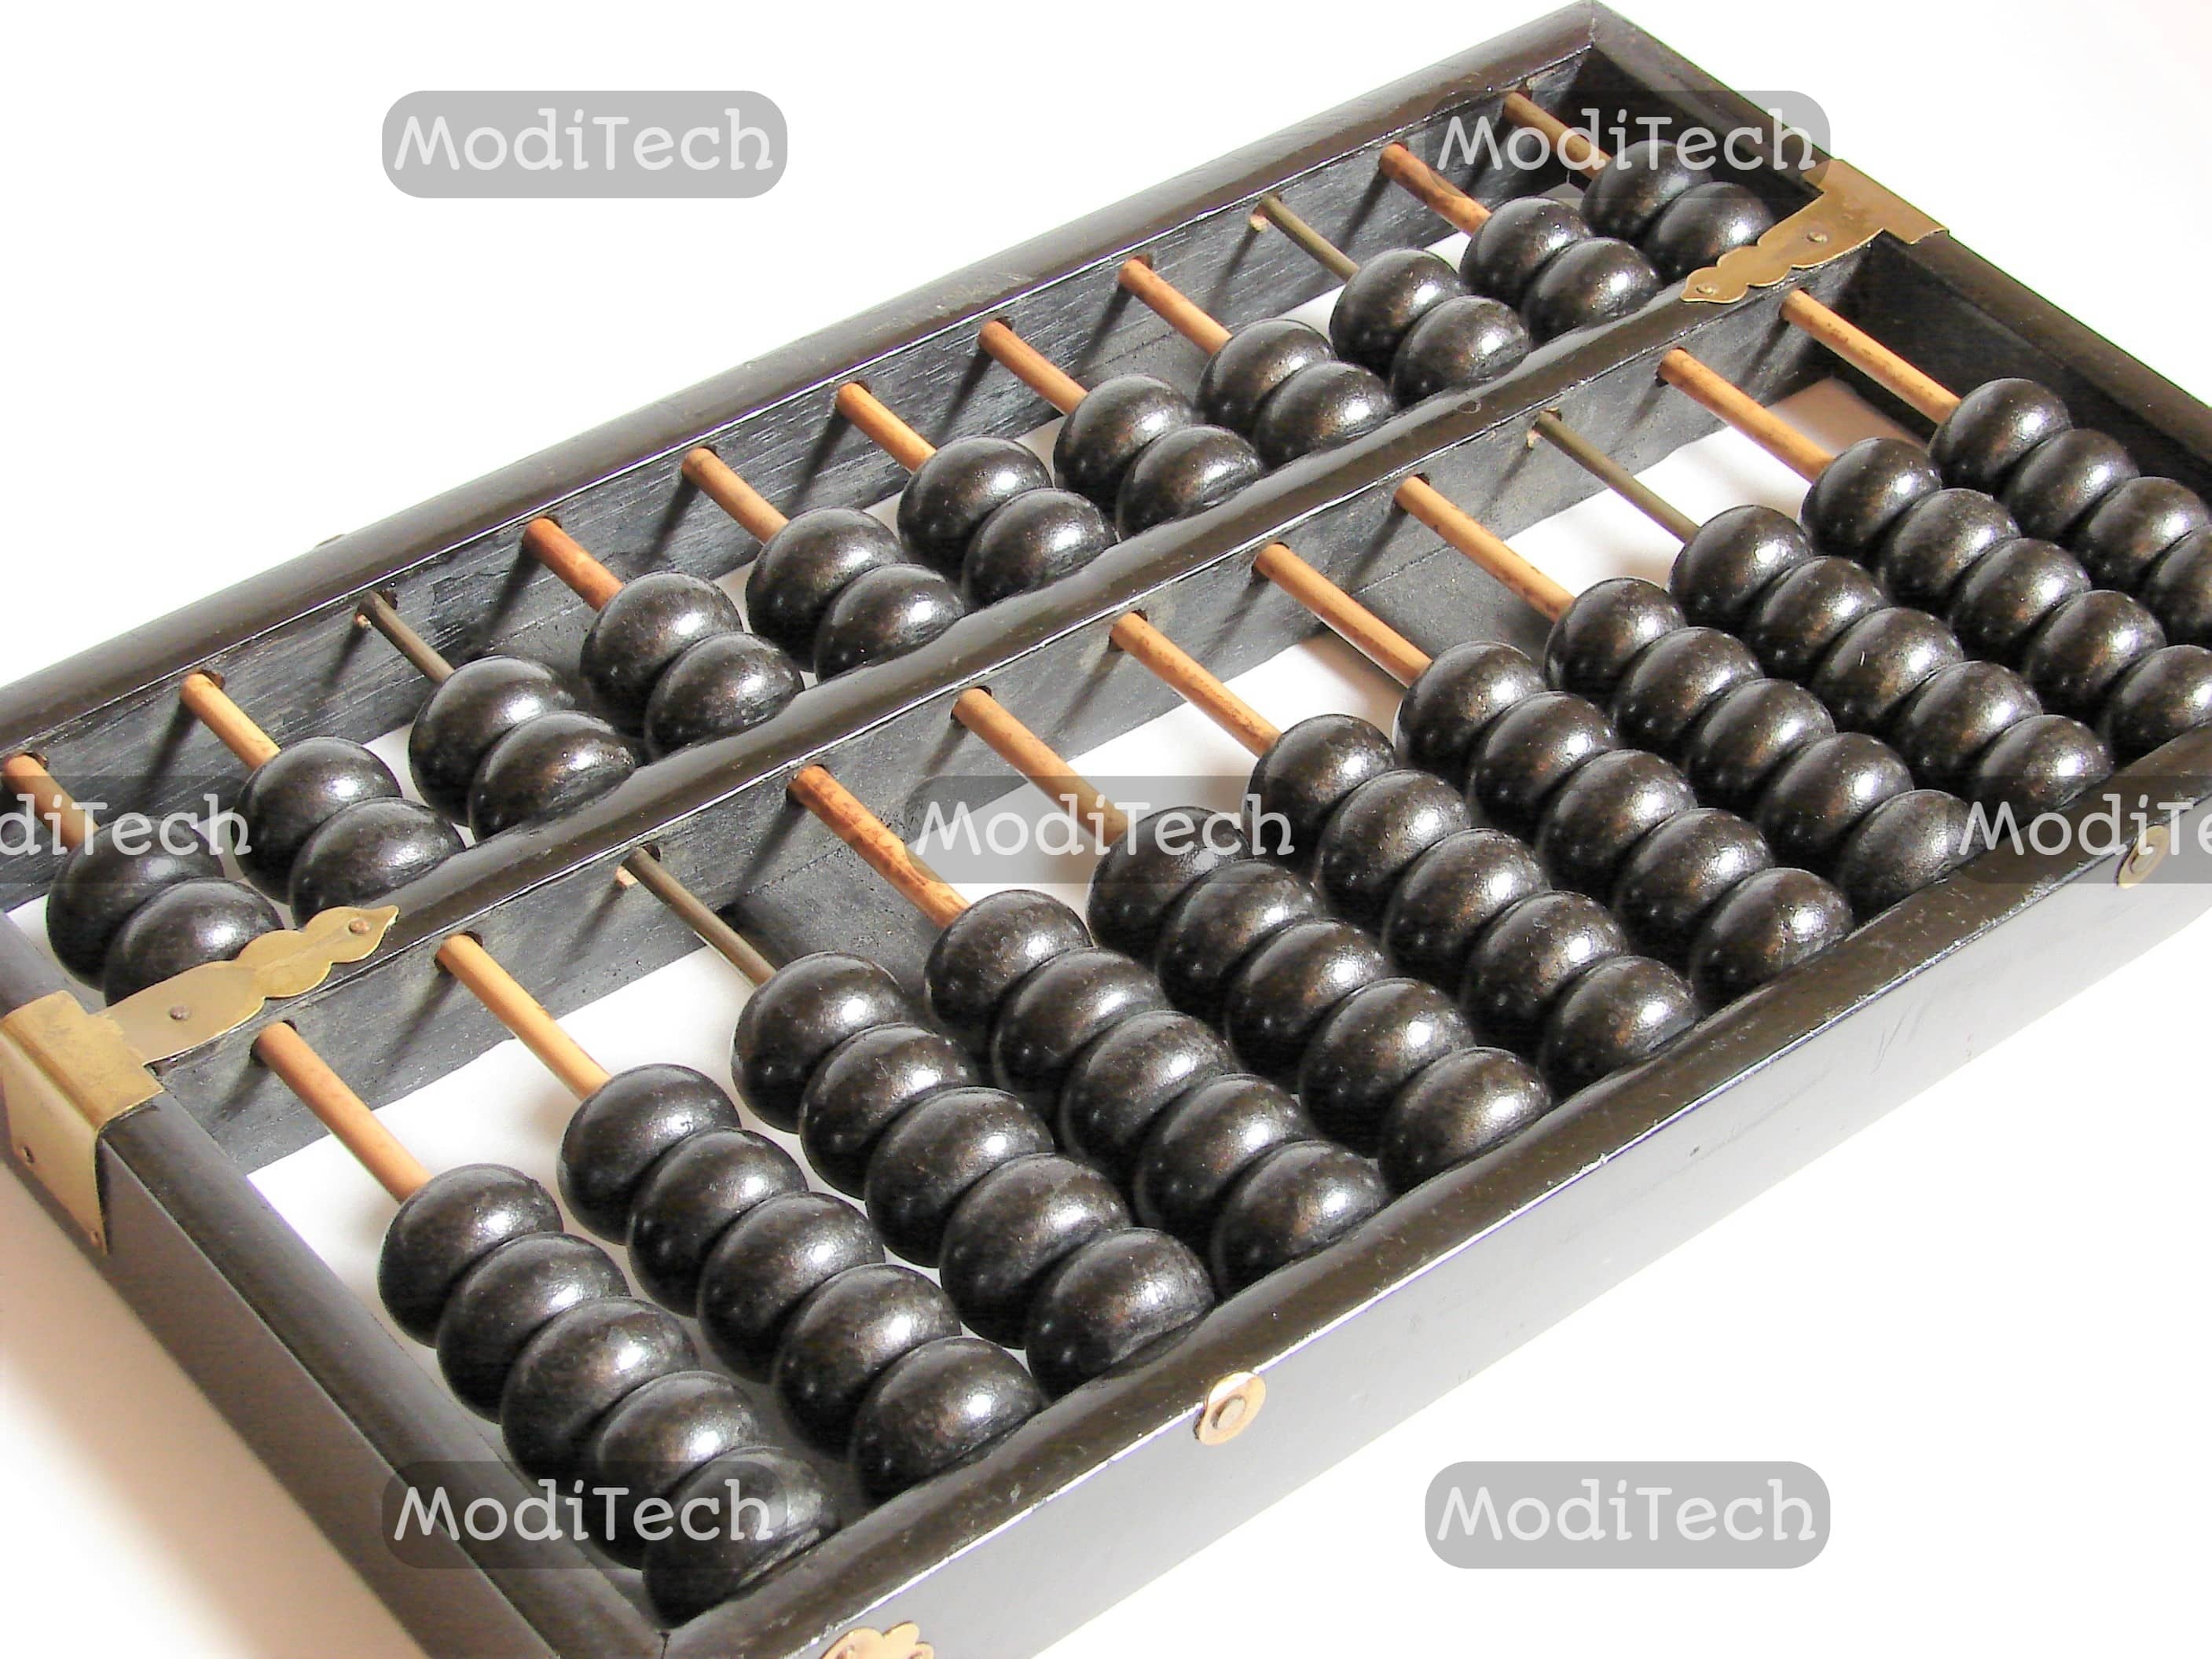 Abacus computer